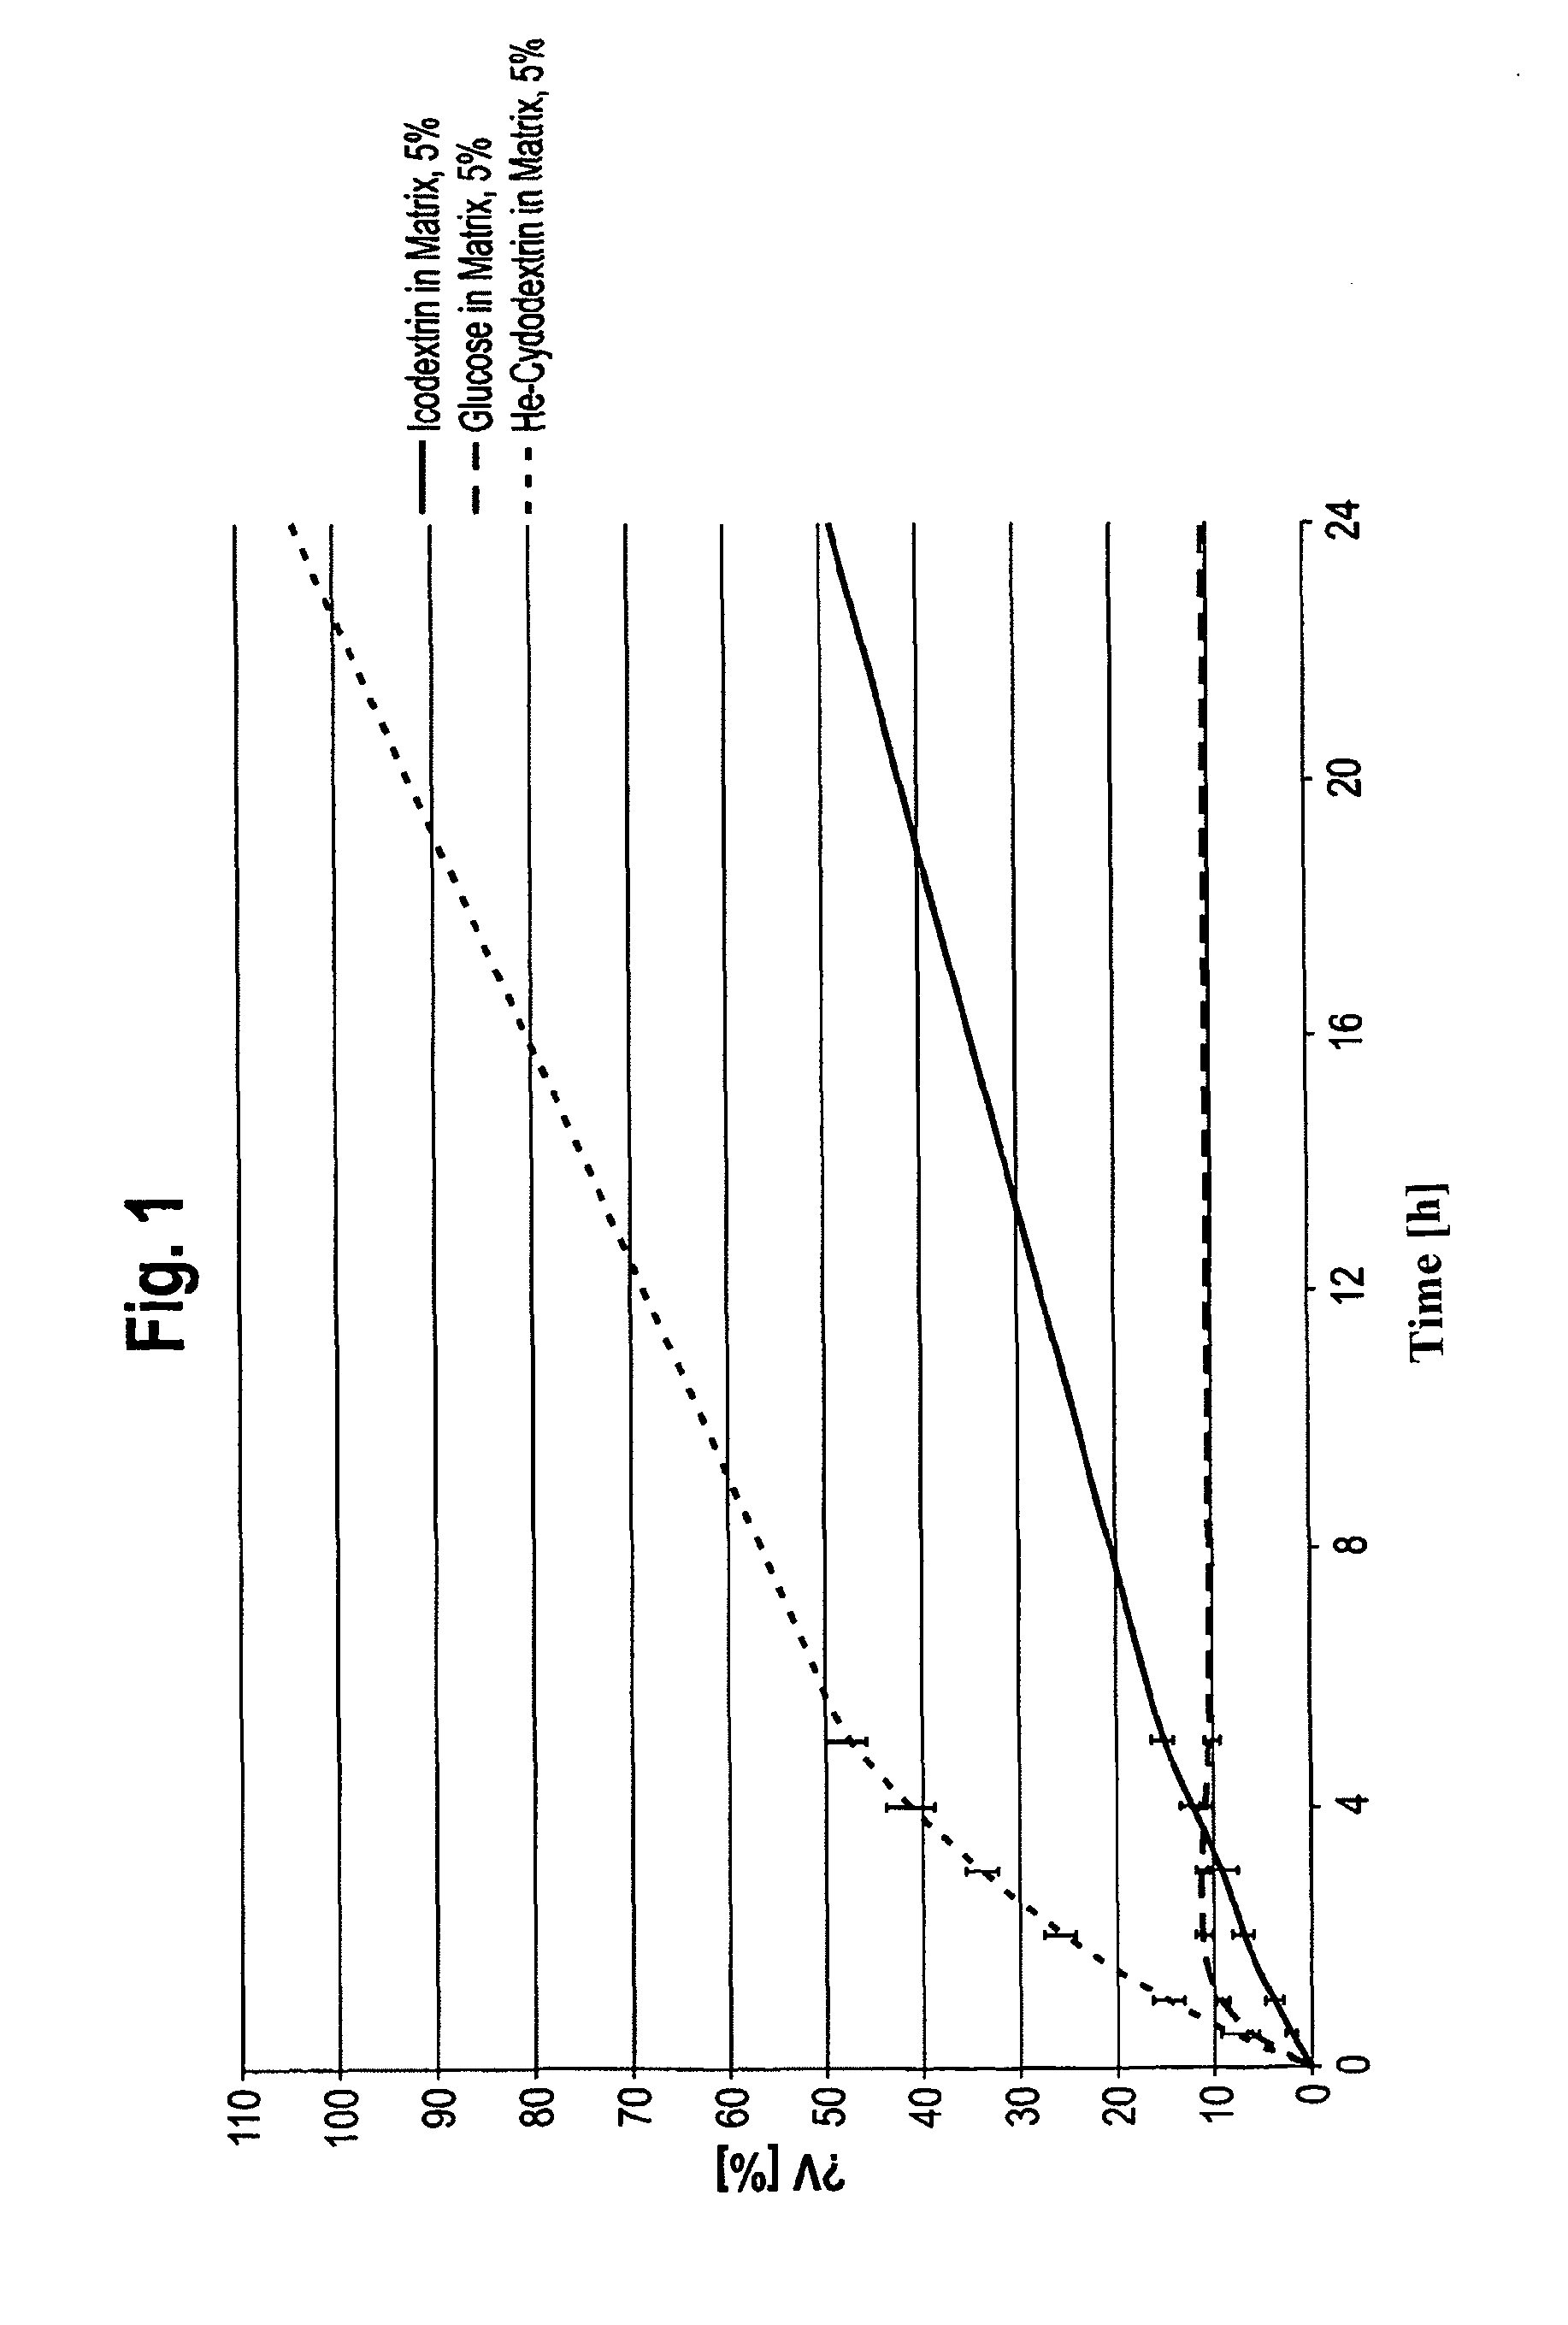 Pharmaceutical compositions containing substituted 6-deoxy-6-sulfanylcyclodextrin